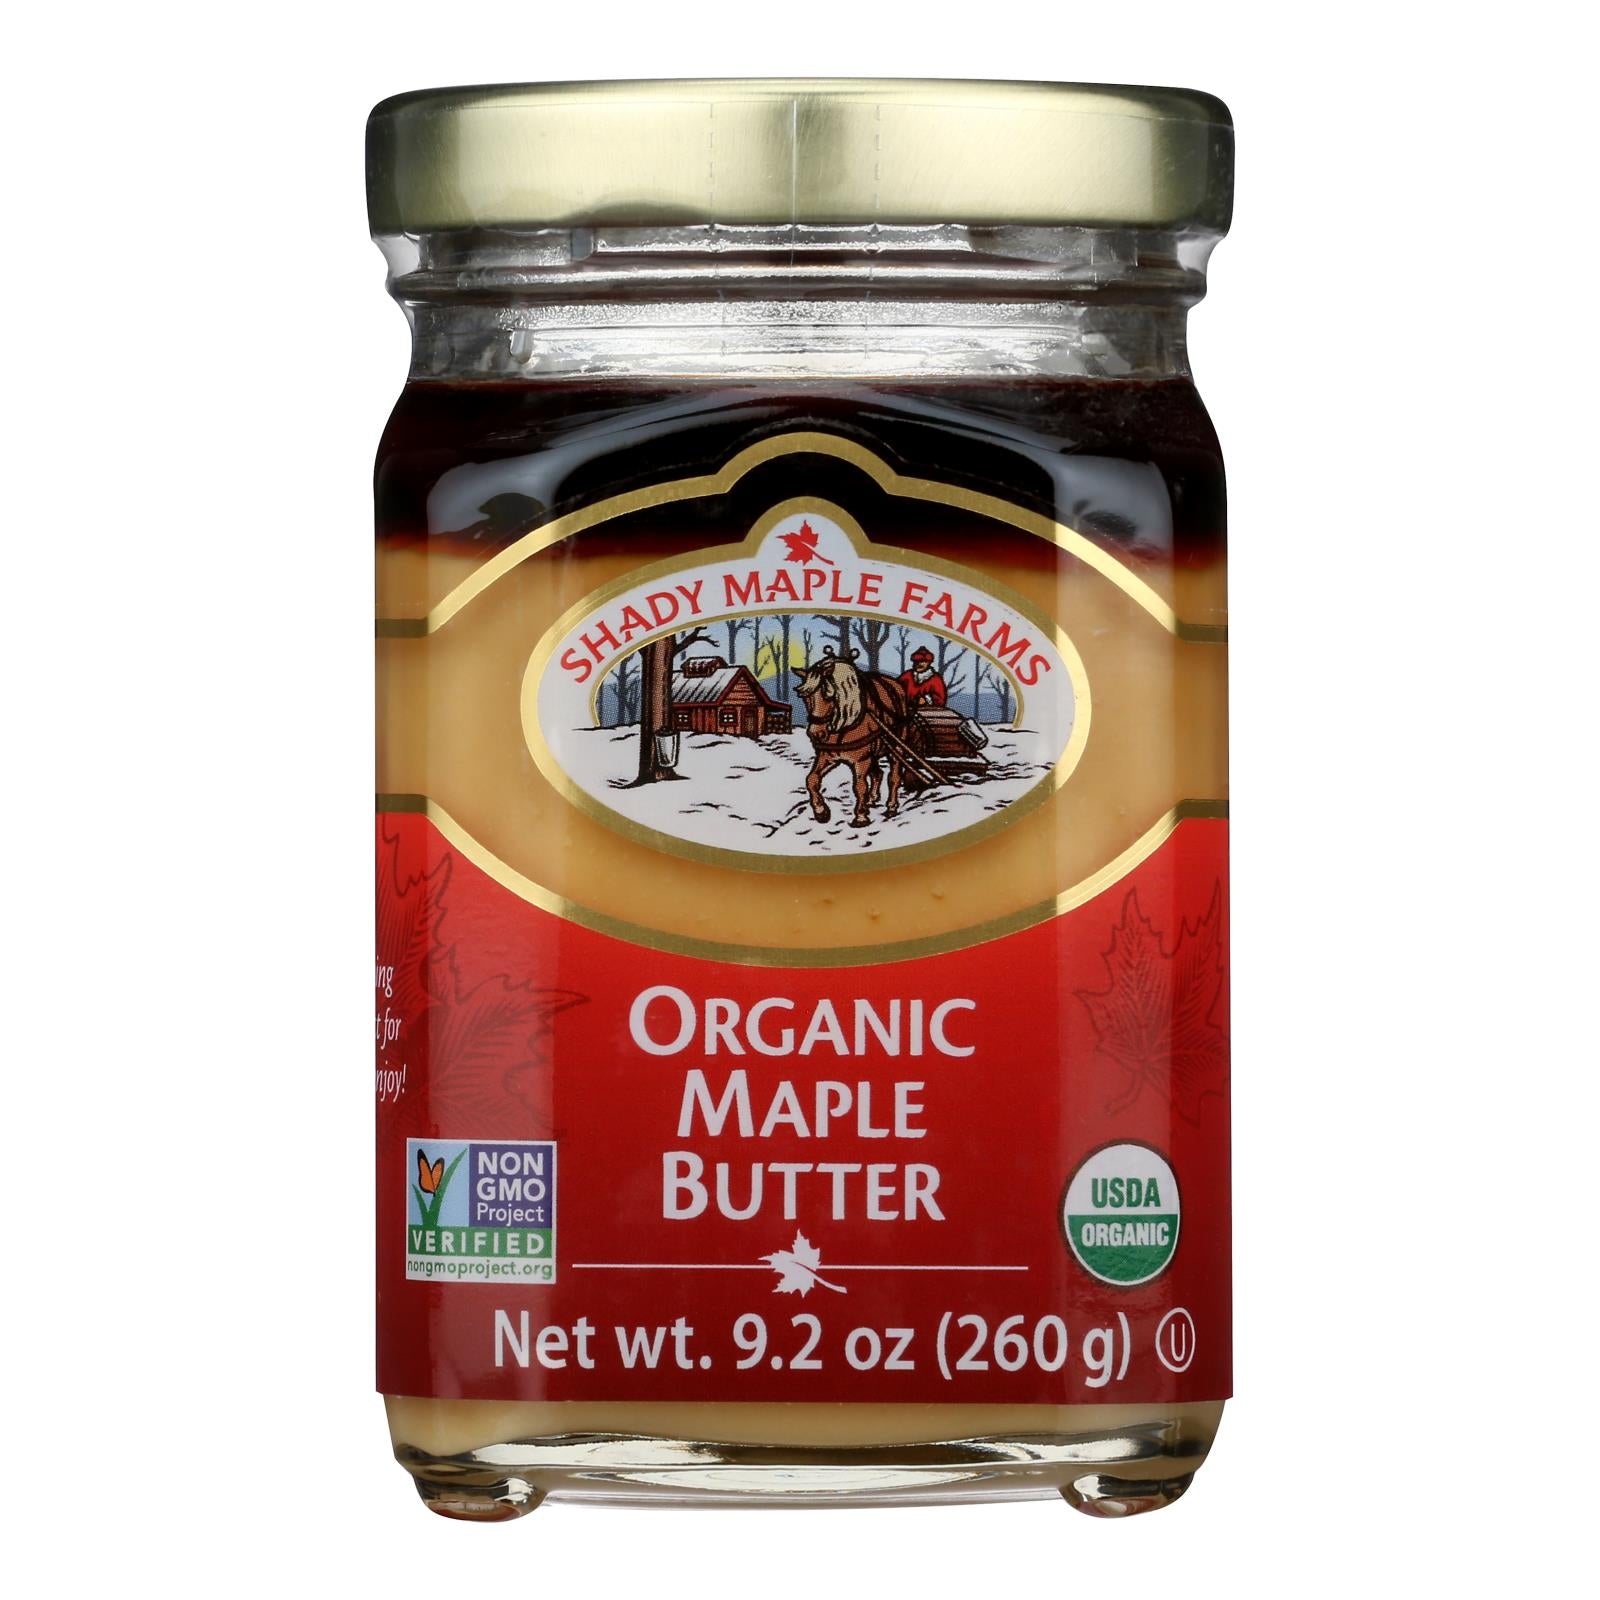 Shady Maple Farms 100 Percent Pure Organic Maple Butter - Case Of 8 - 9.2 Oz.